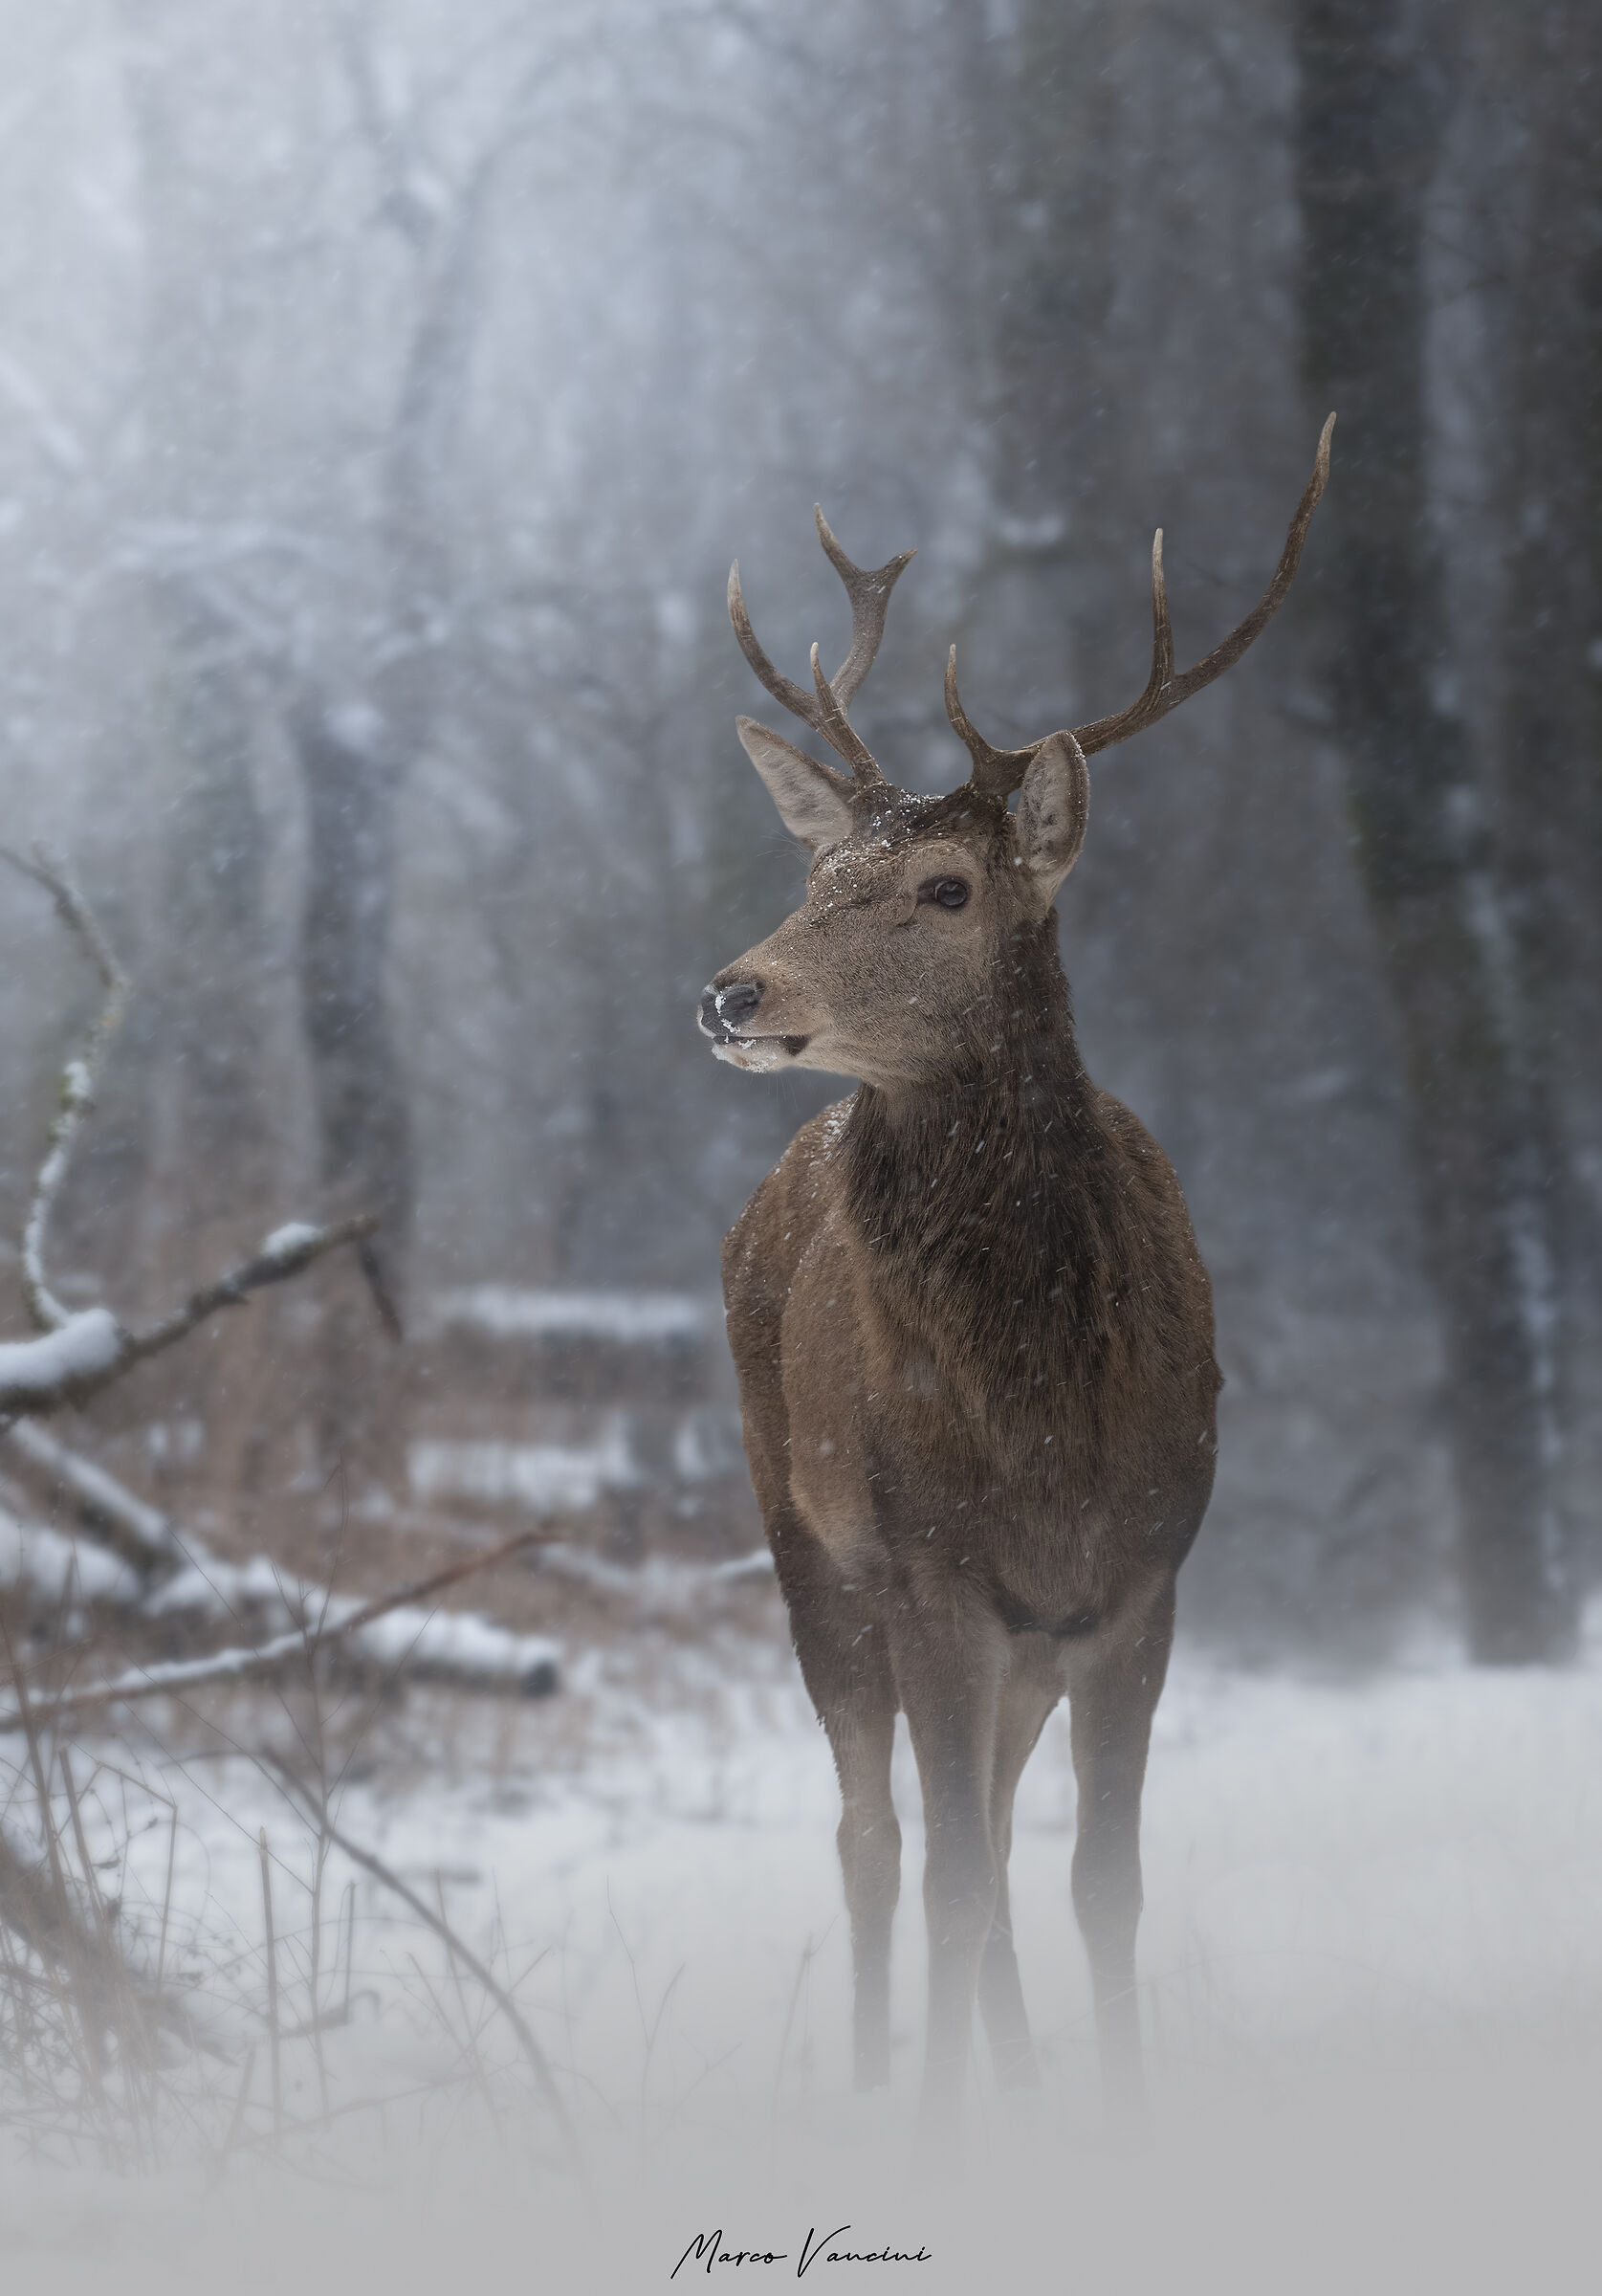 The deer and the snow ...